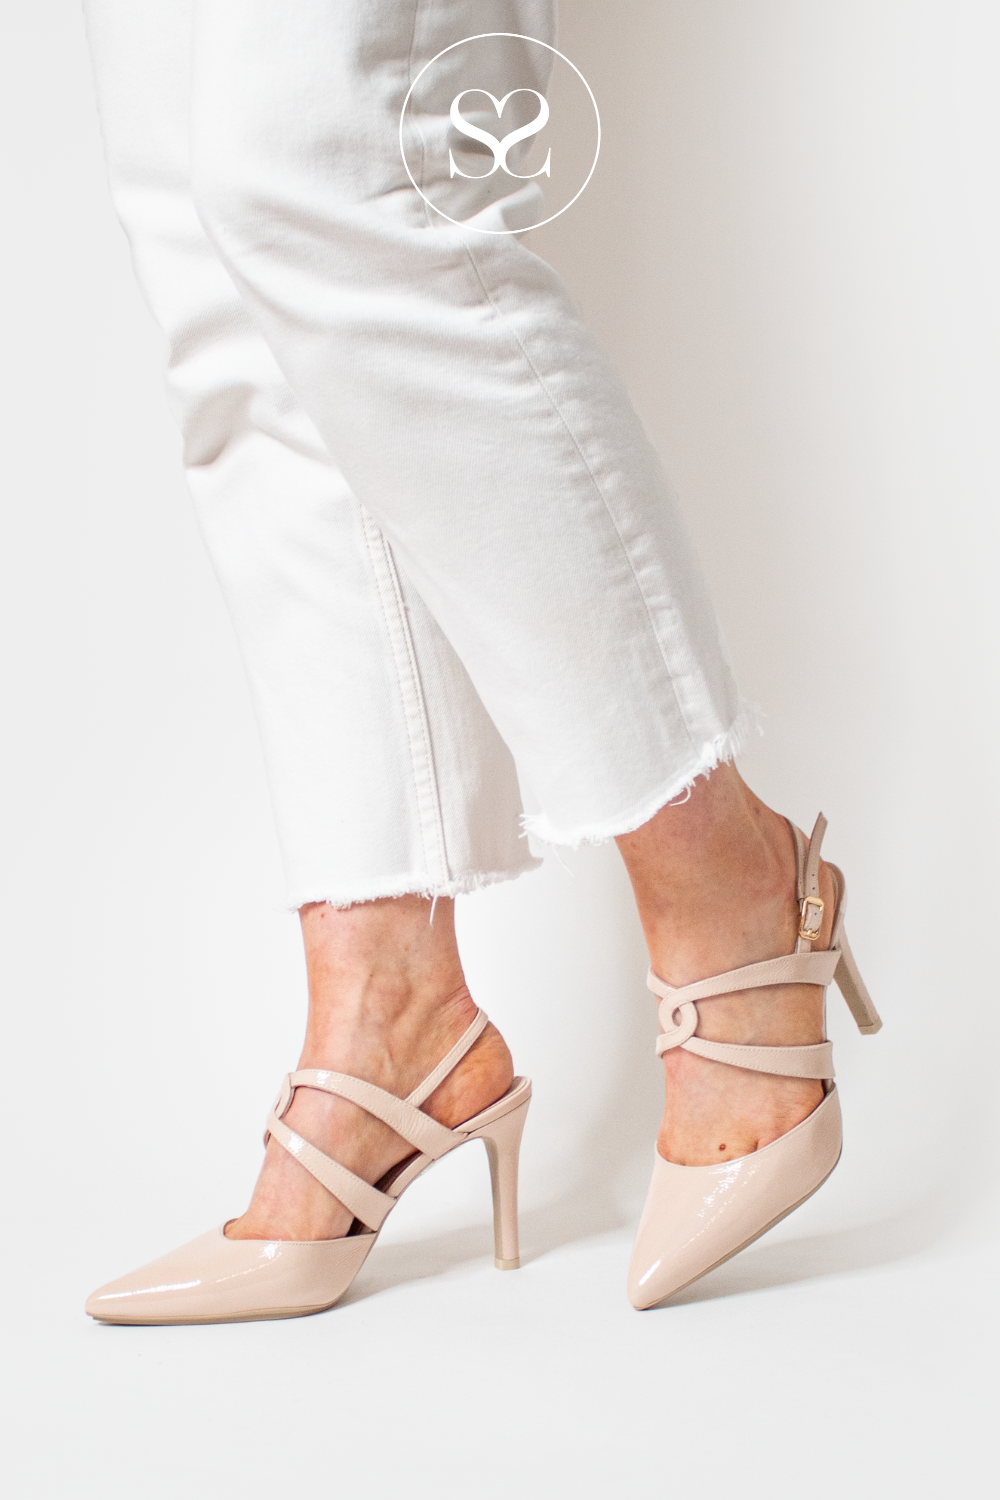 LODI RIANES NUDE PATENT POINTED TOE SLINGBACK WITH ADJUSTABLE STRAP AND CRISS CROSS STRAP DETAIL ACROSS FOOT